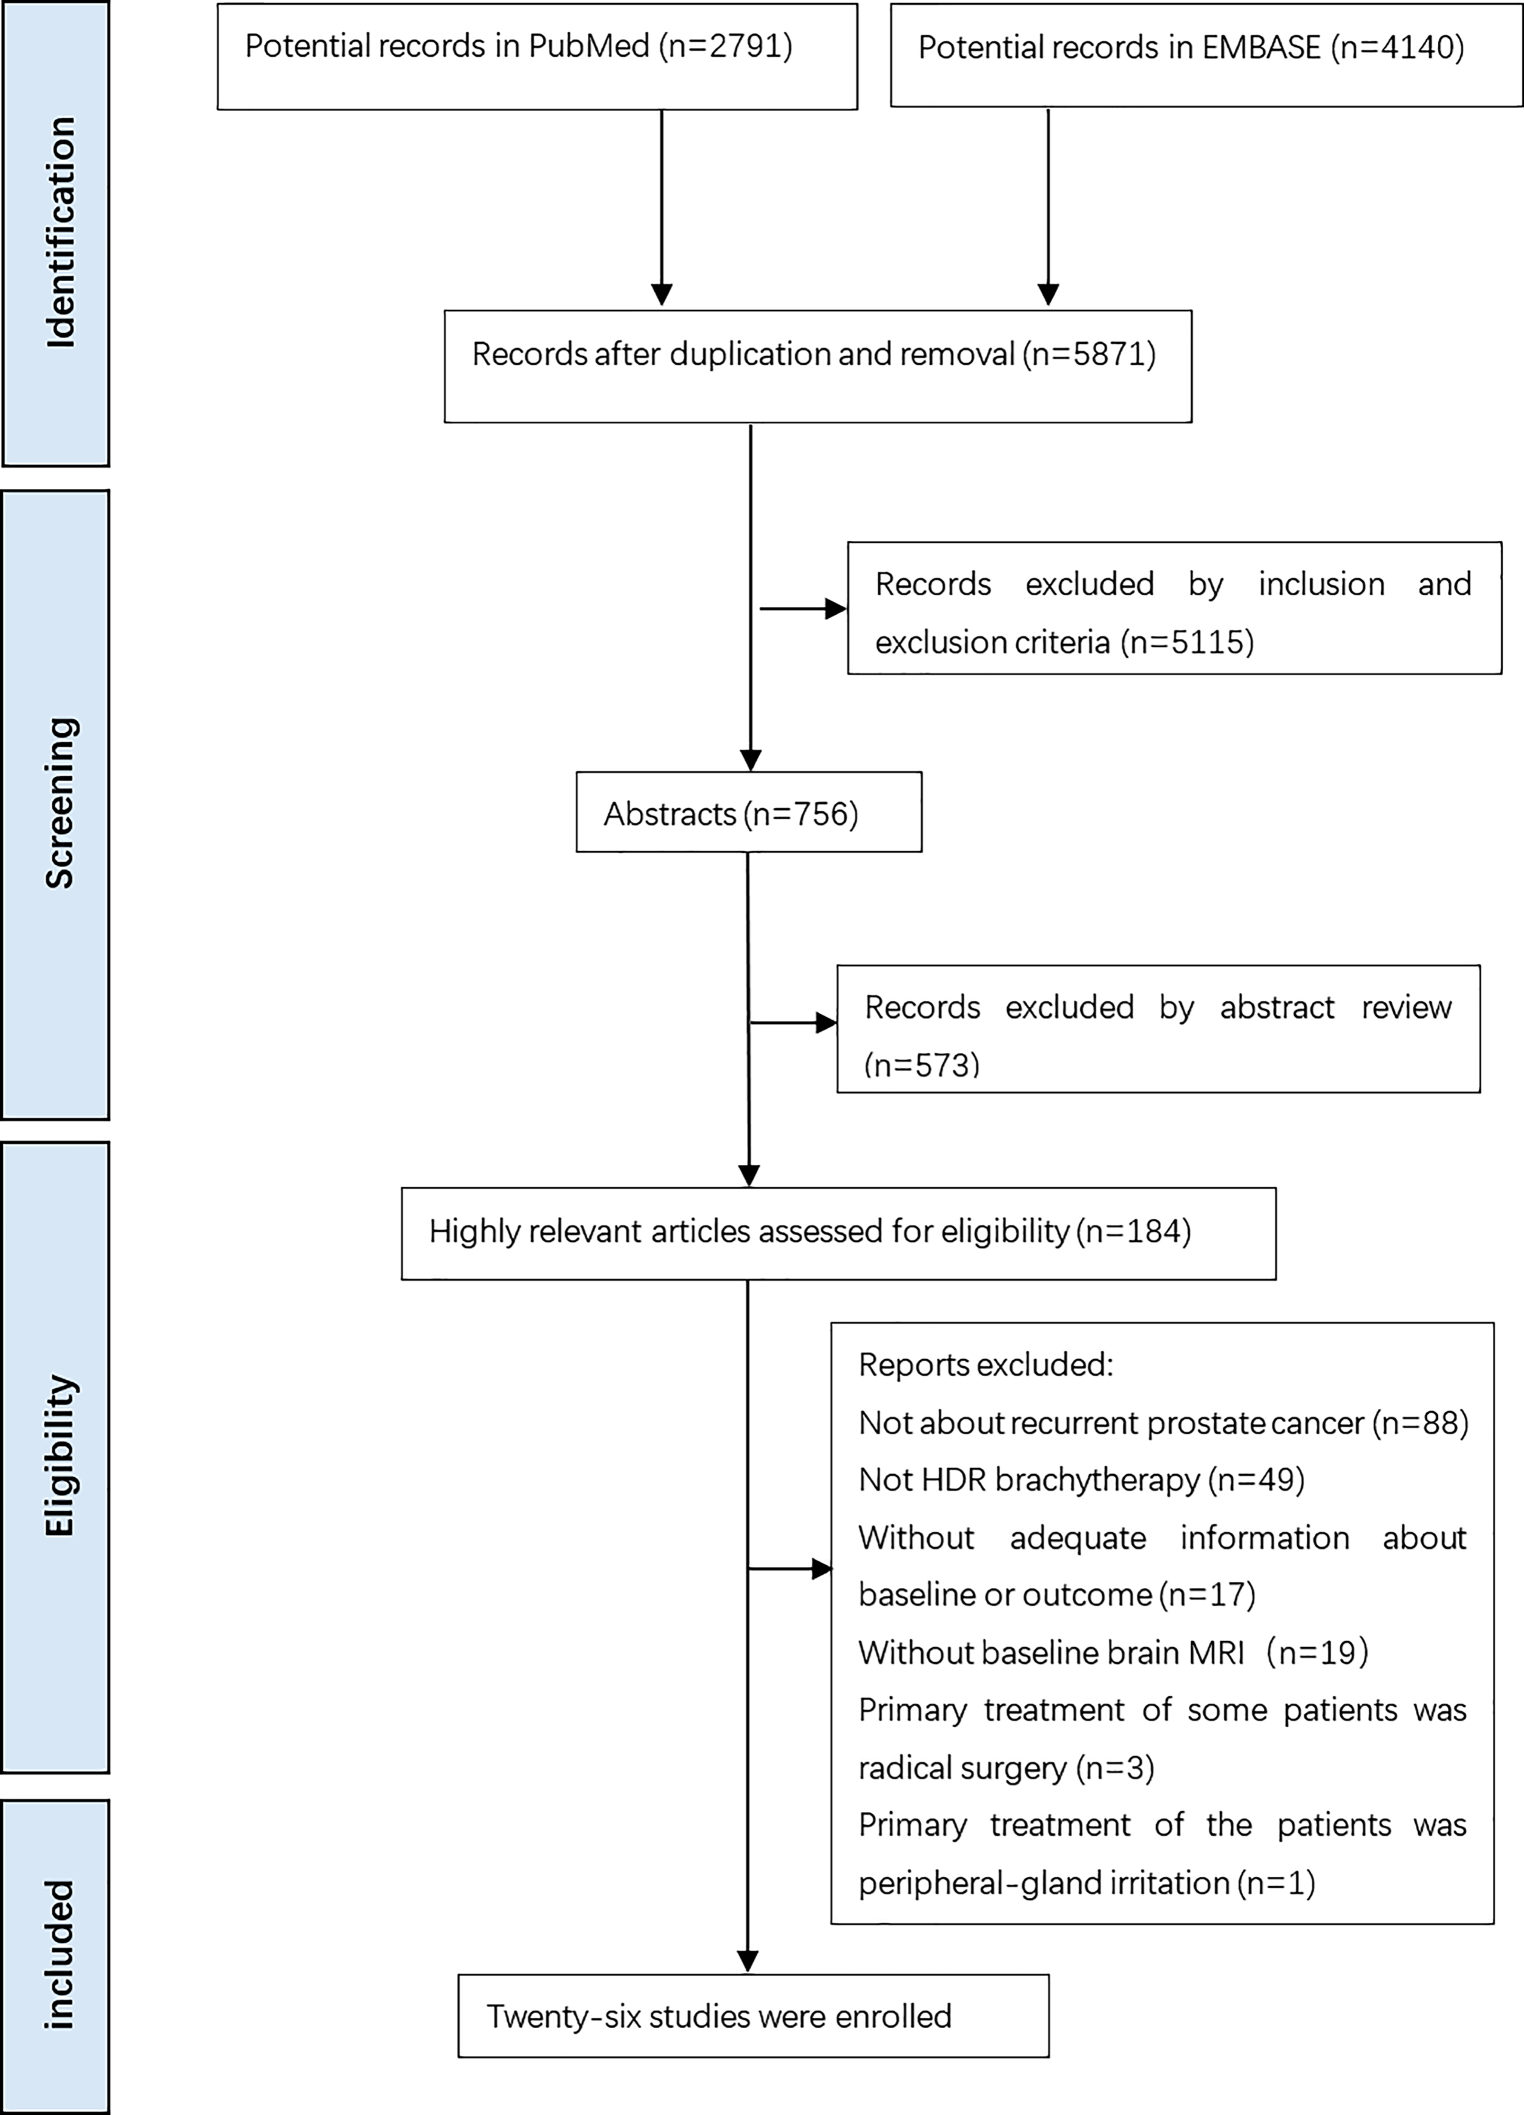 Evaluation of the safety and efficacy of high-dose rate brachytherapy for radiorecurrent prostate cancer: a systematic review and meta-analysis